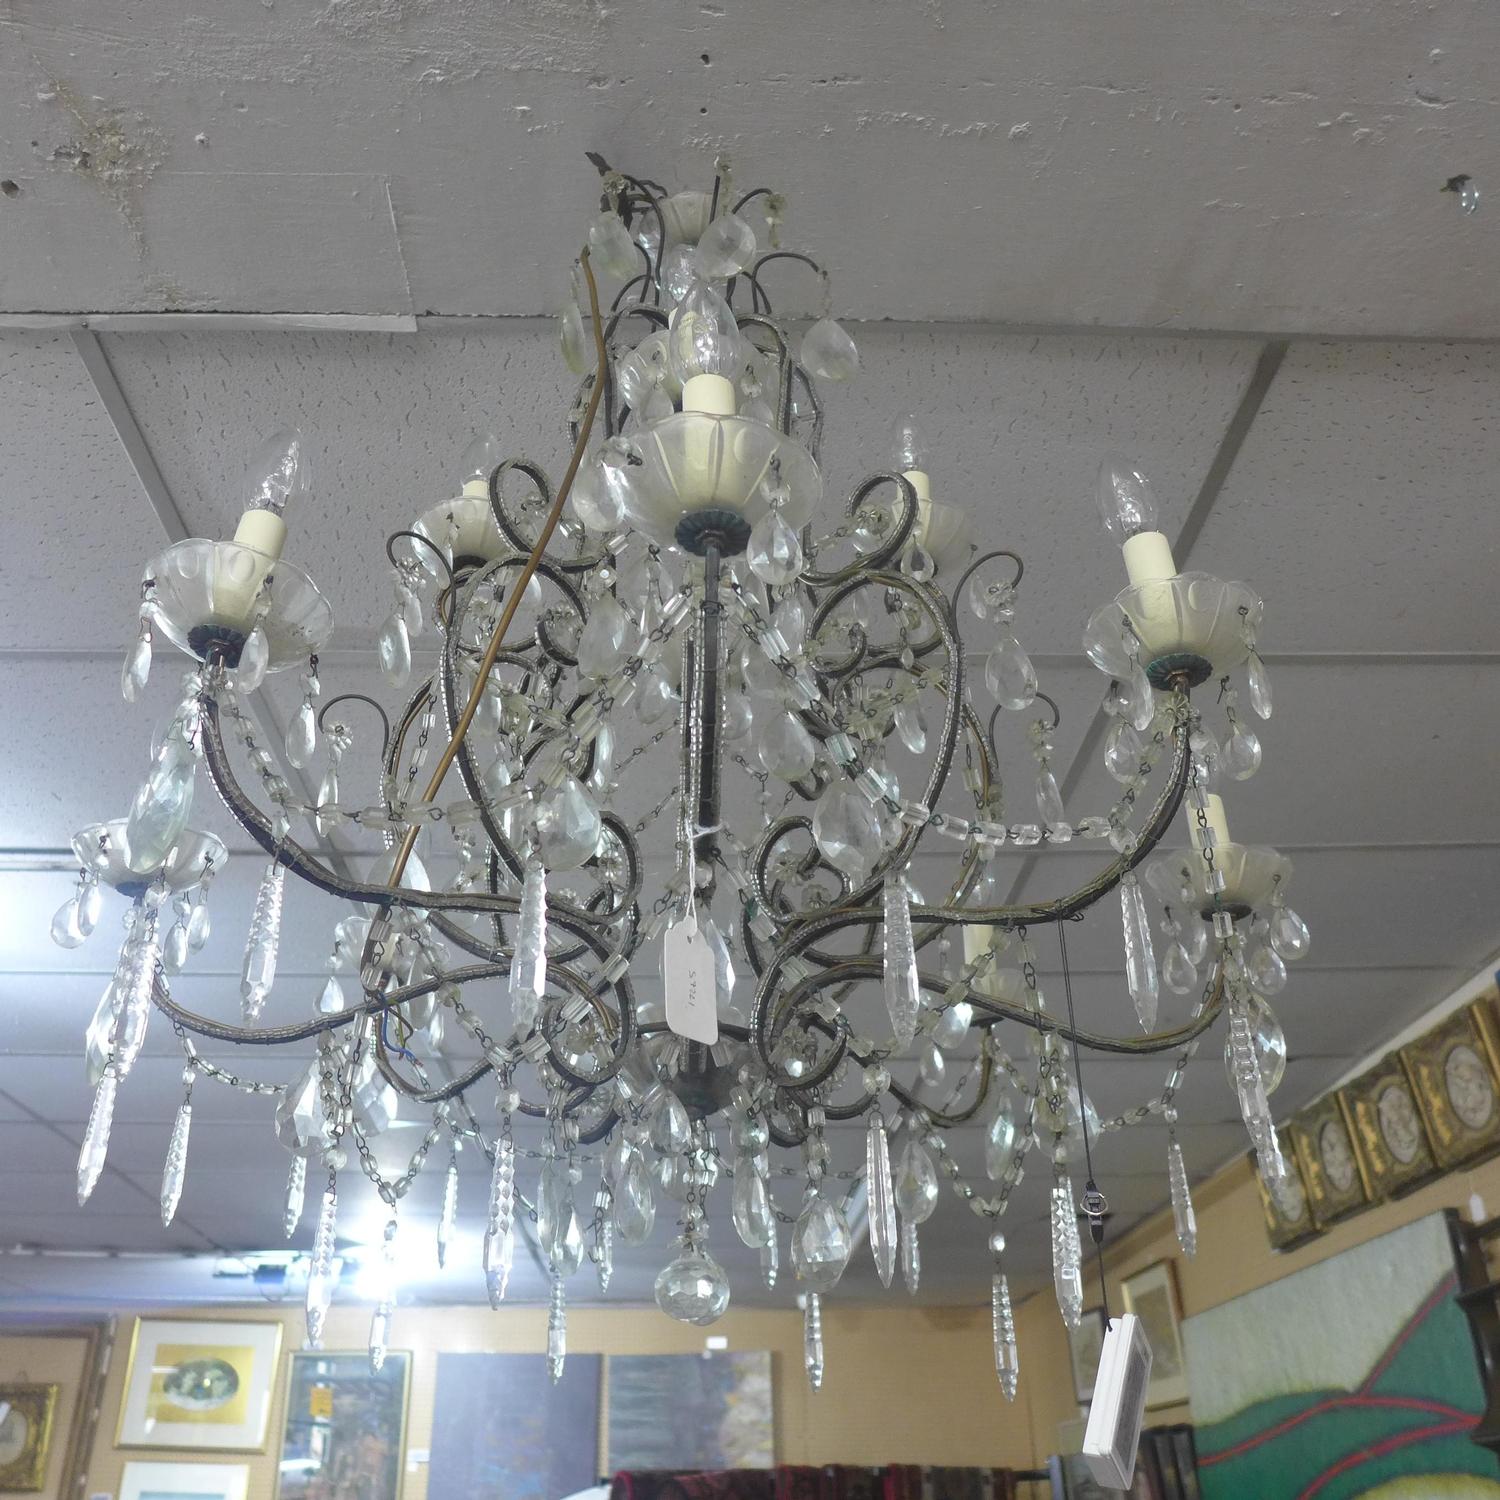 A Venetian style 8 branch chandelier with glass droplets - Image 2 of 3